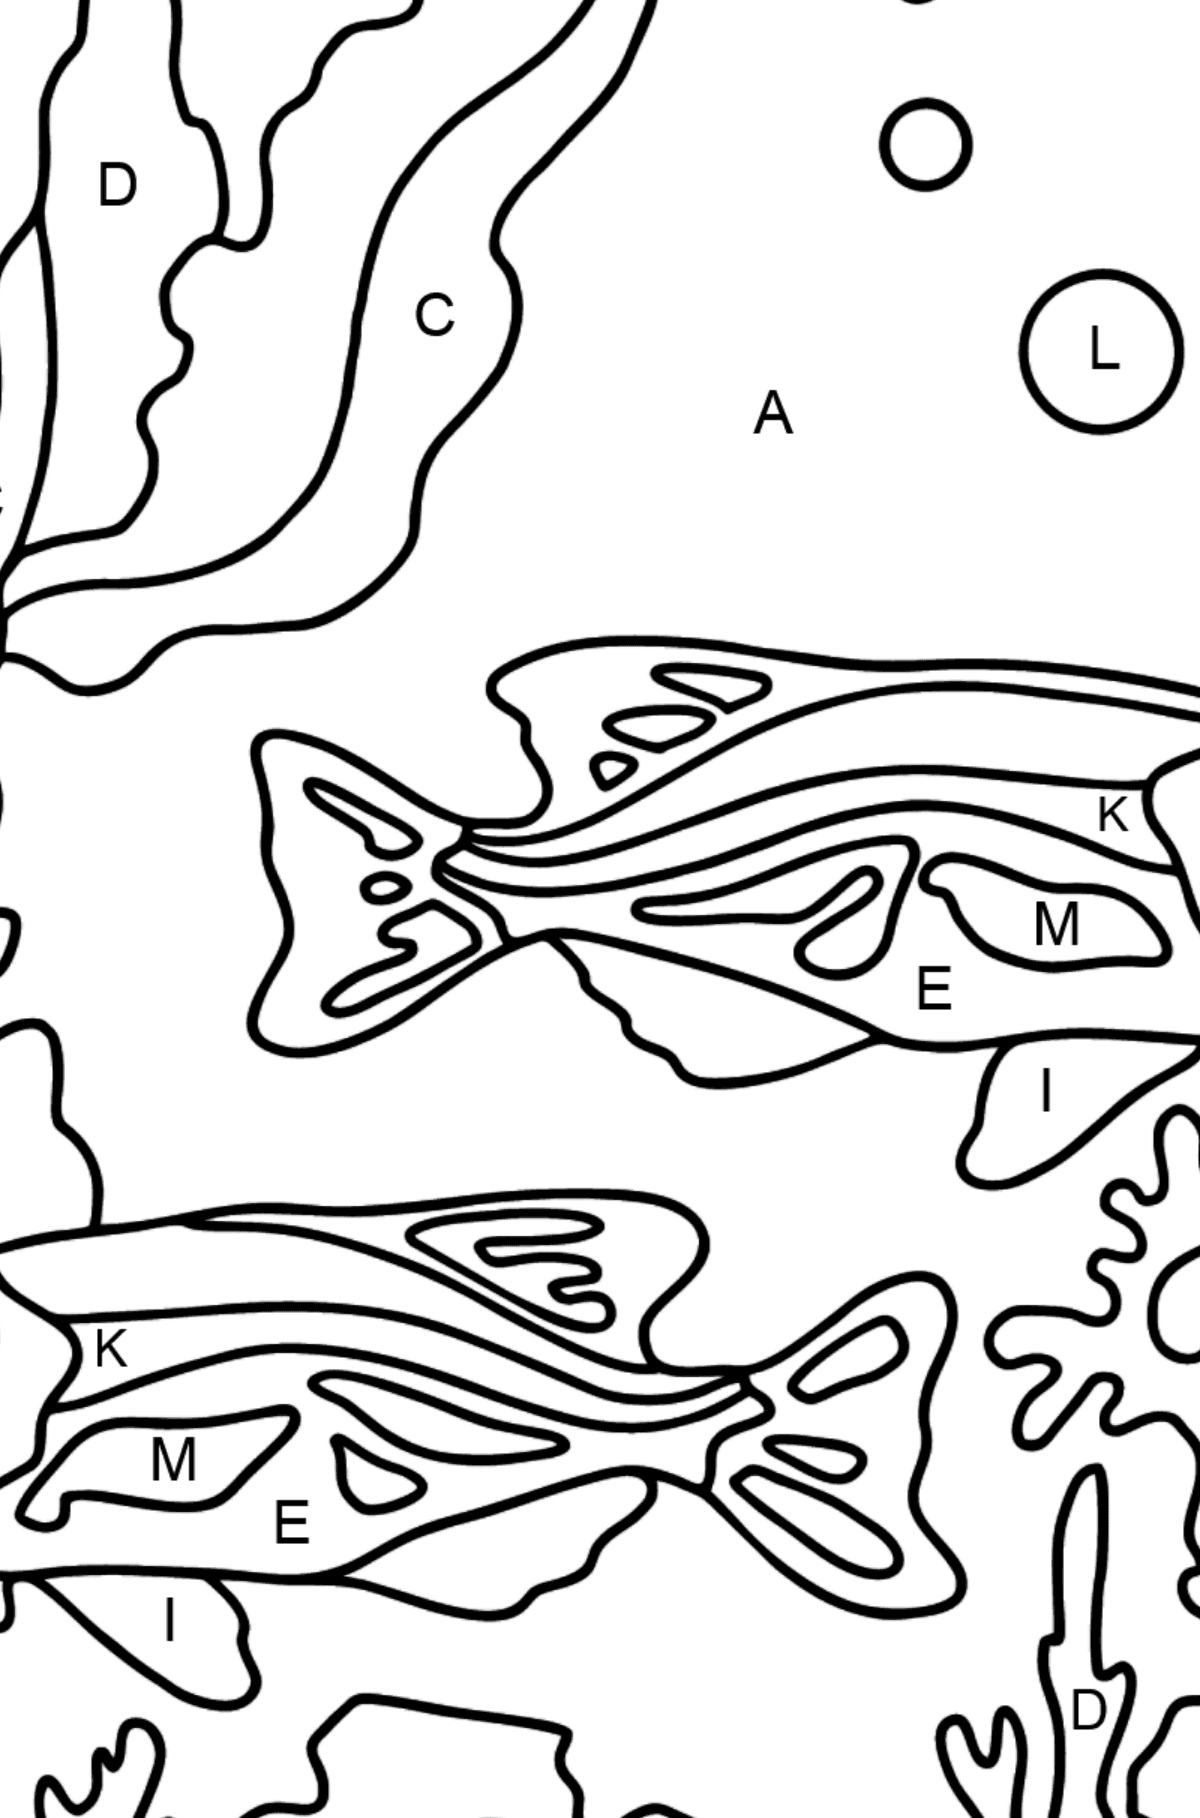 Coloring Page - Fish are Swimming Together Peacefully - Coloring by Letters for Kids